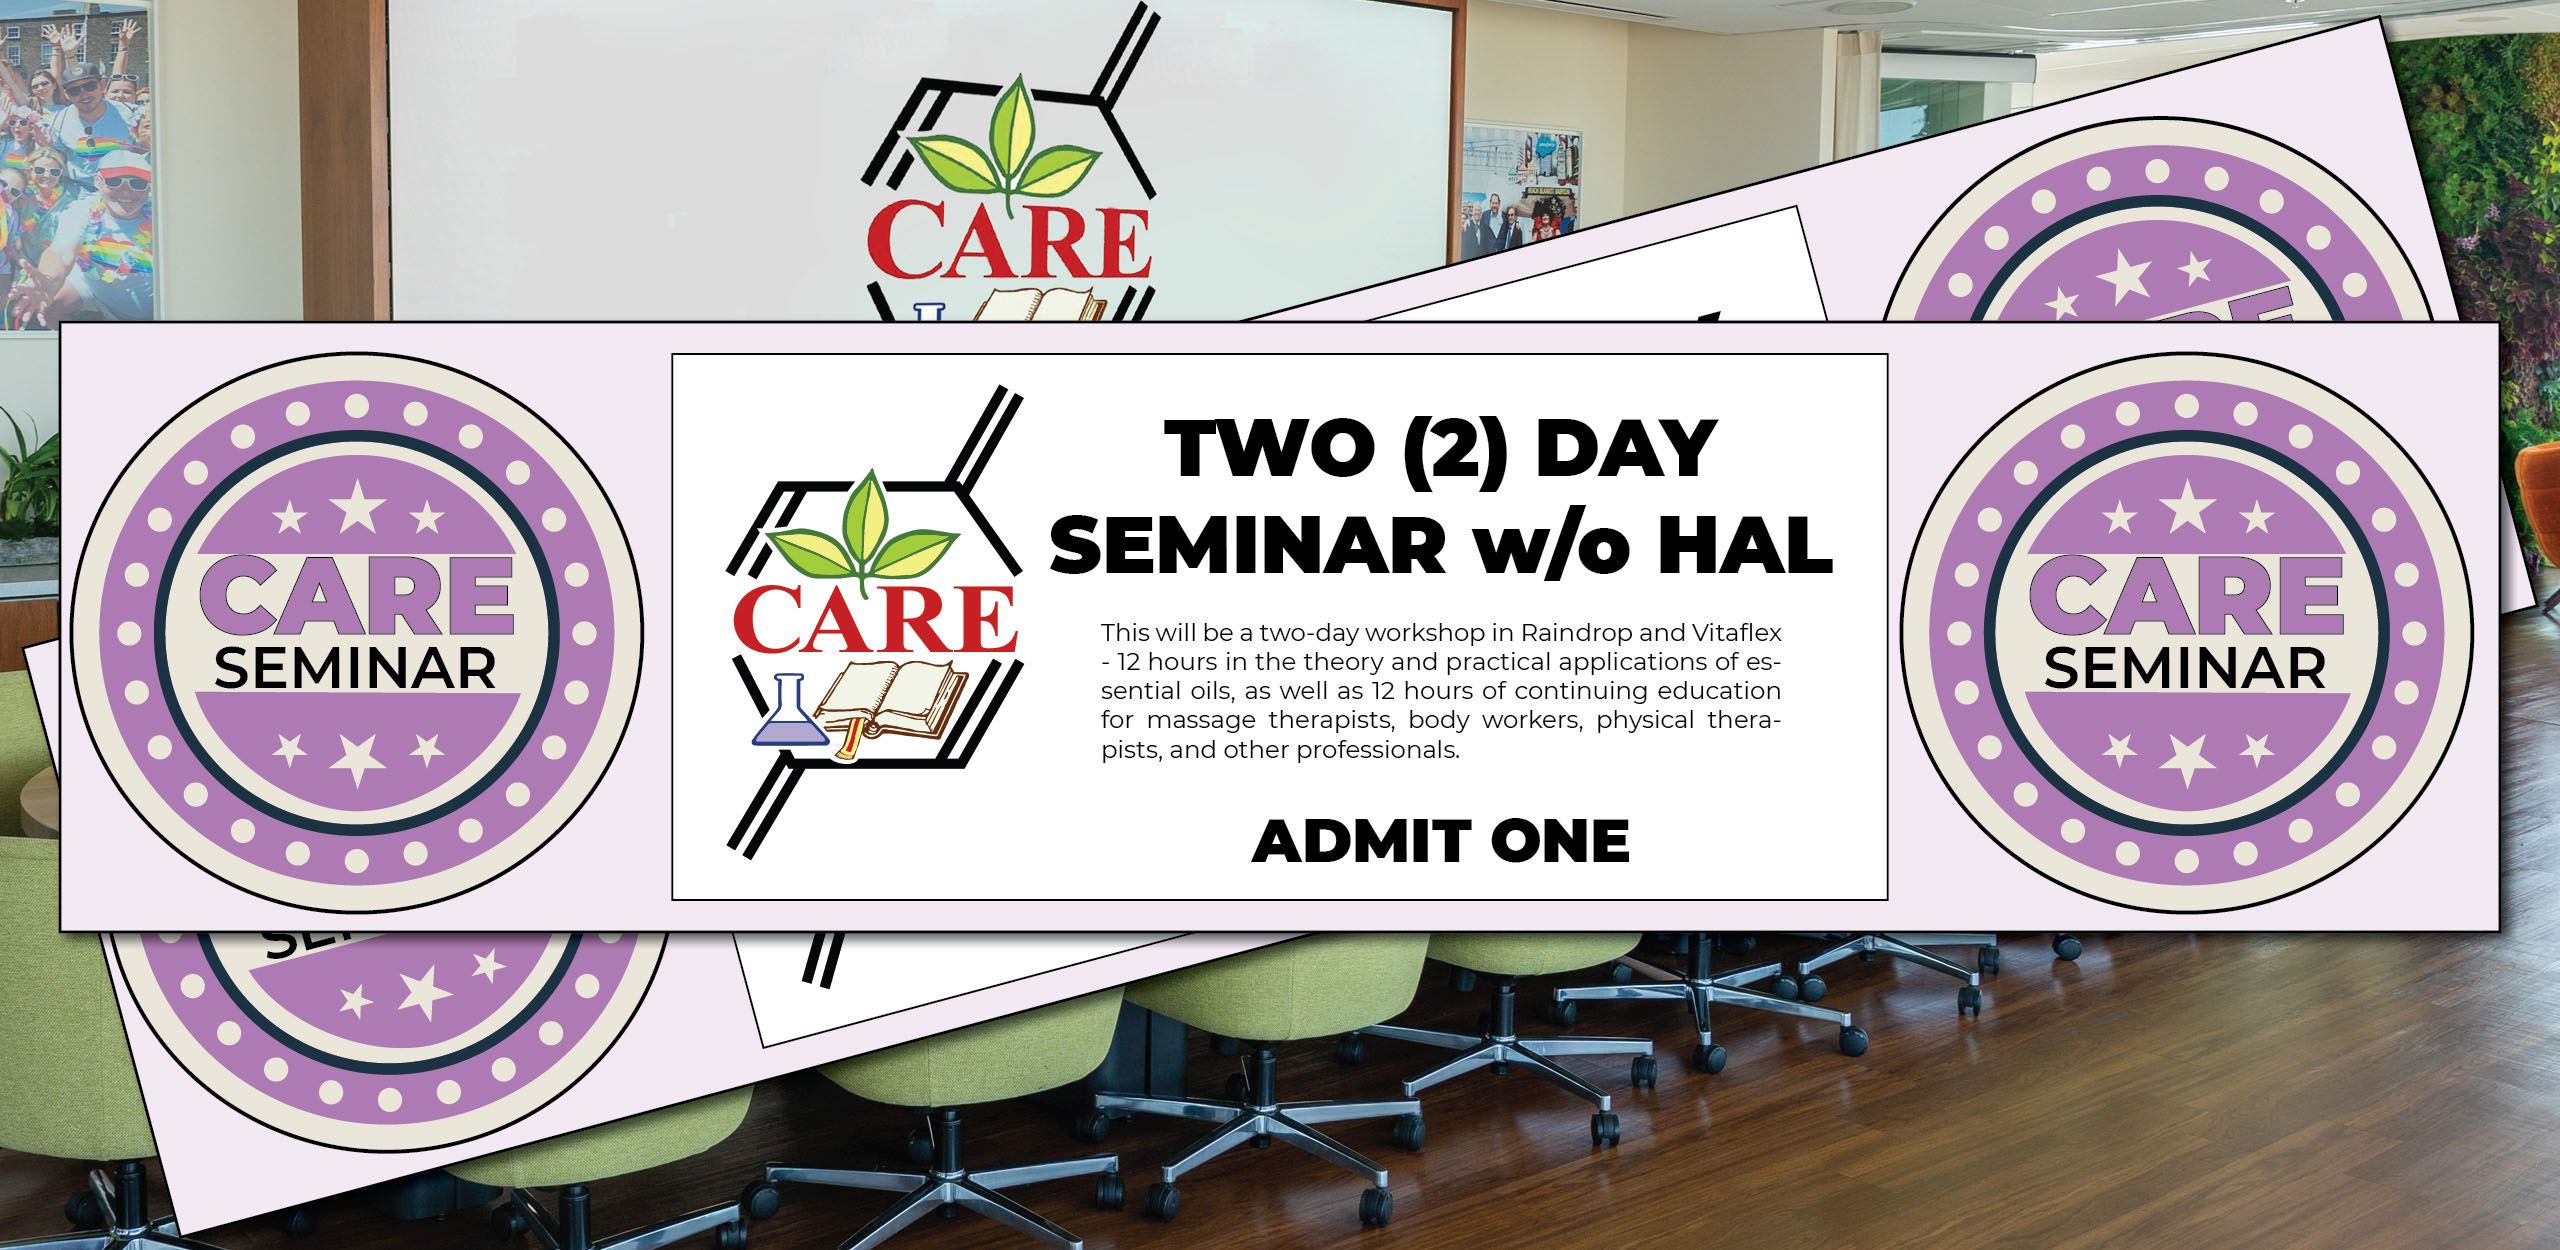 2day seminar banner without hal d470e25b